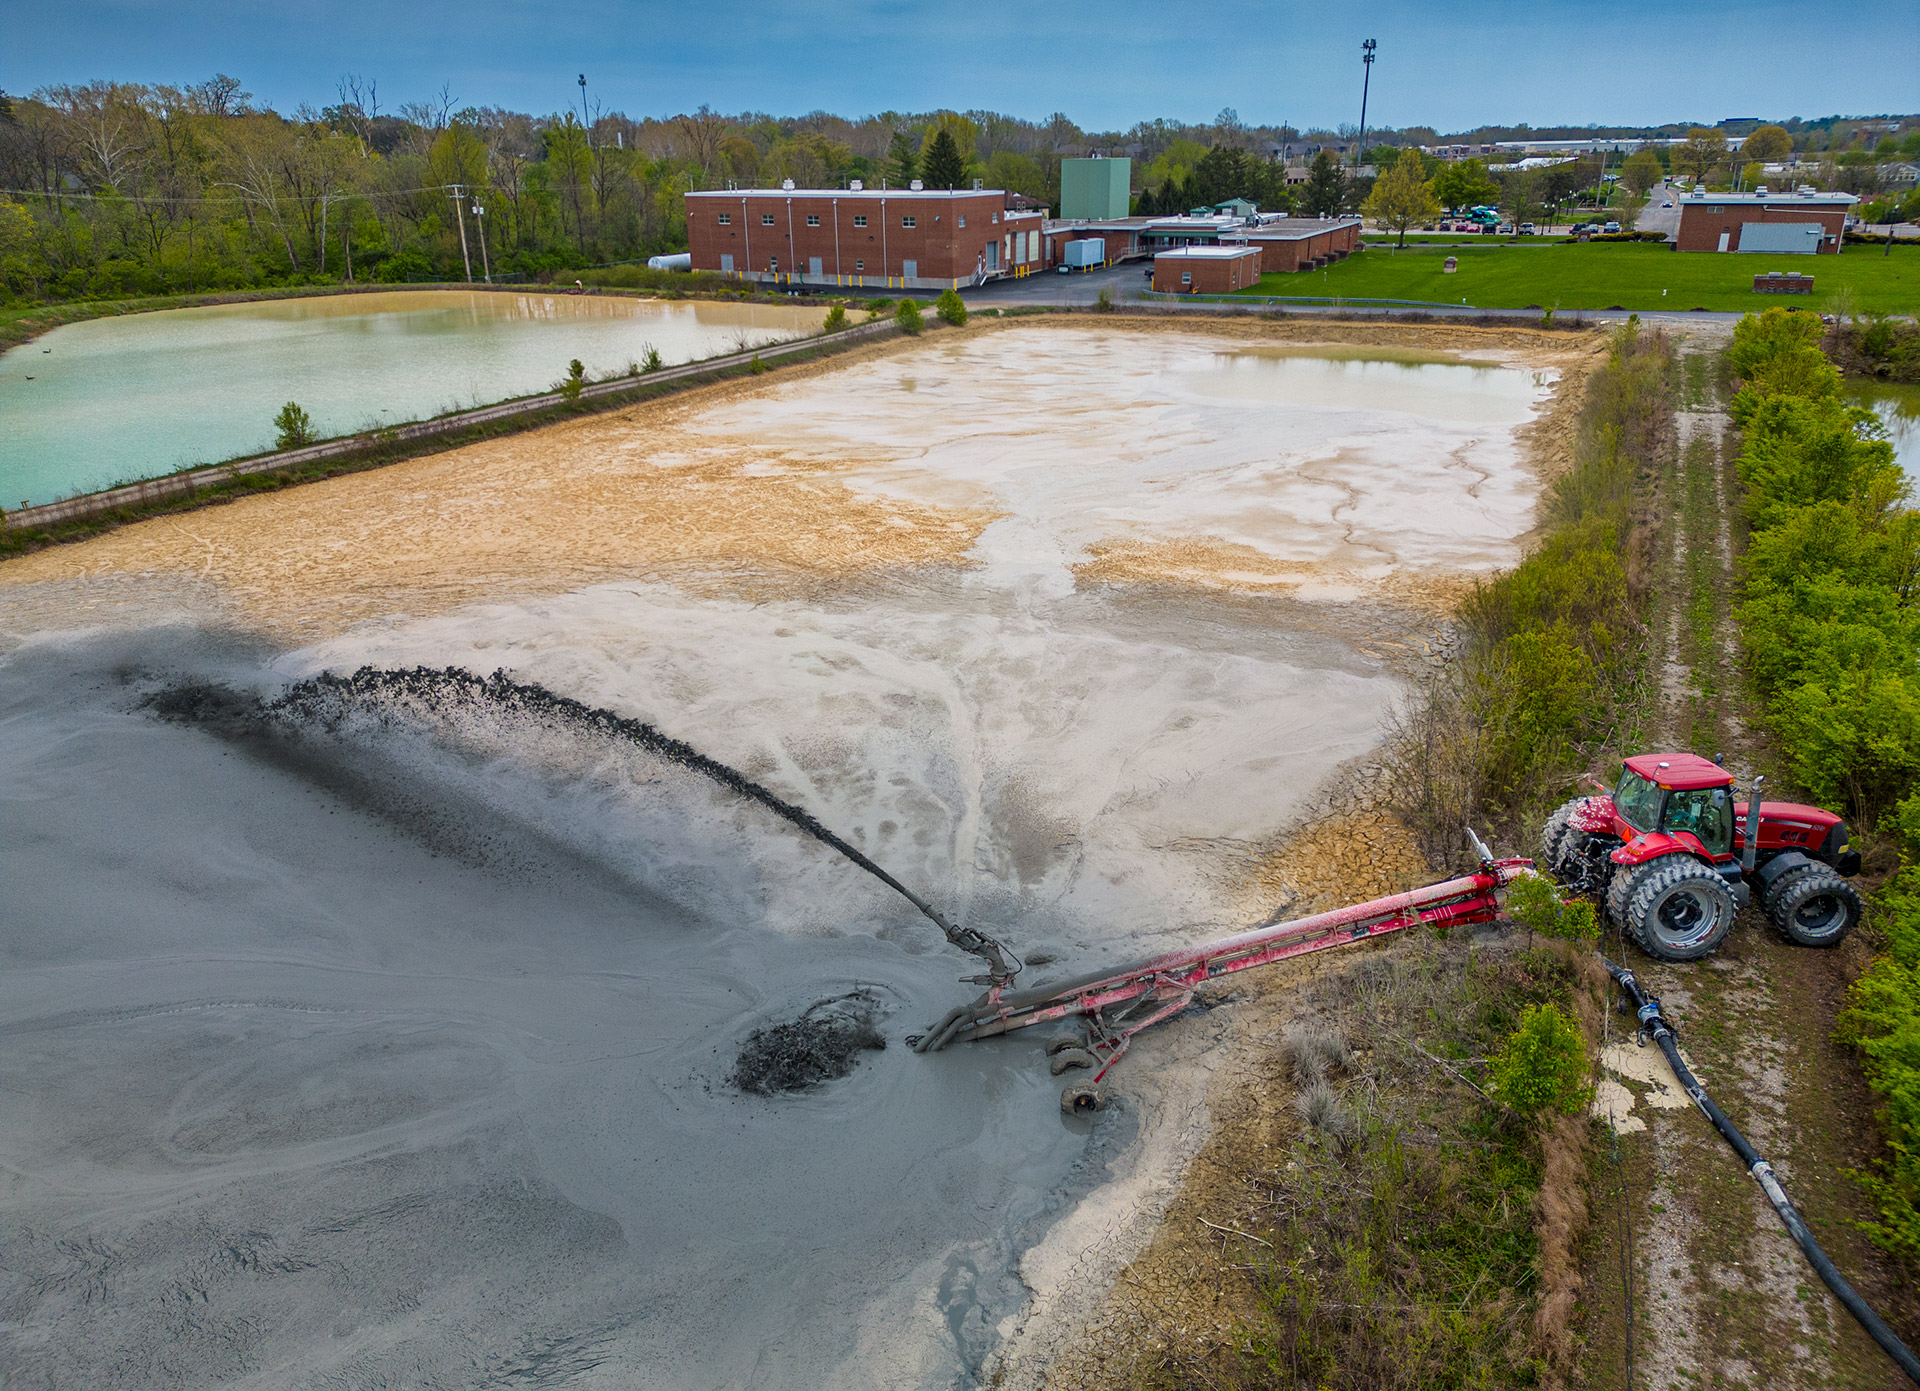 A pumping station sprays sludge to stir the lime holding pond at the city water treatment plant before it is pumped into a tanker truck where it is transported to farms to be spread to aid in the growth of field crops. My Final Photo for April 25, 2023.